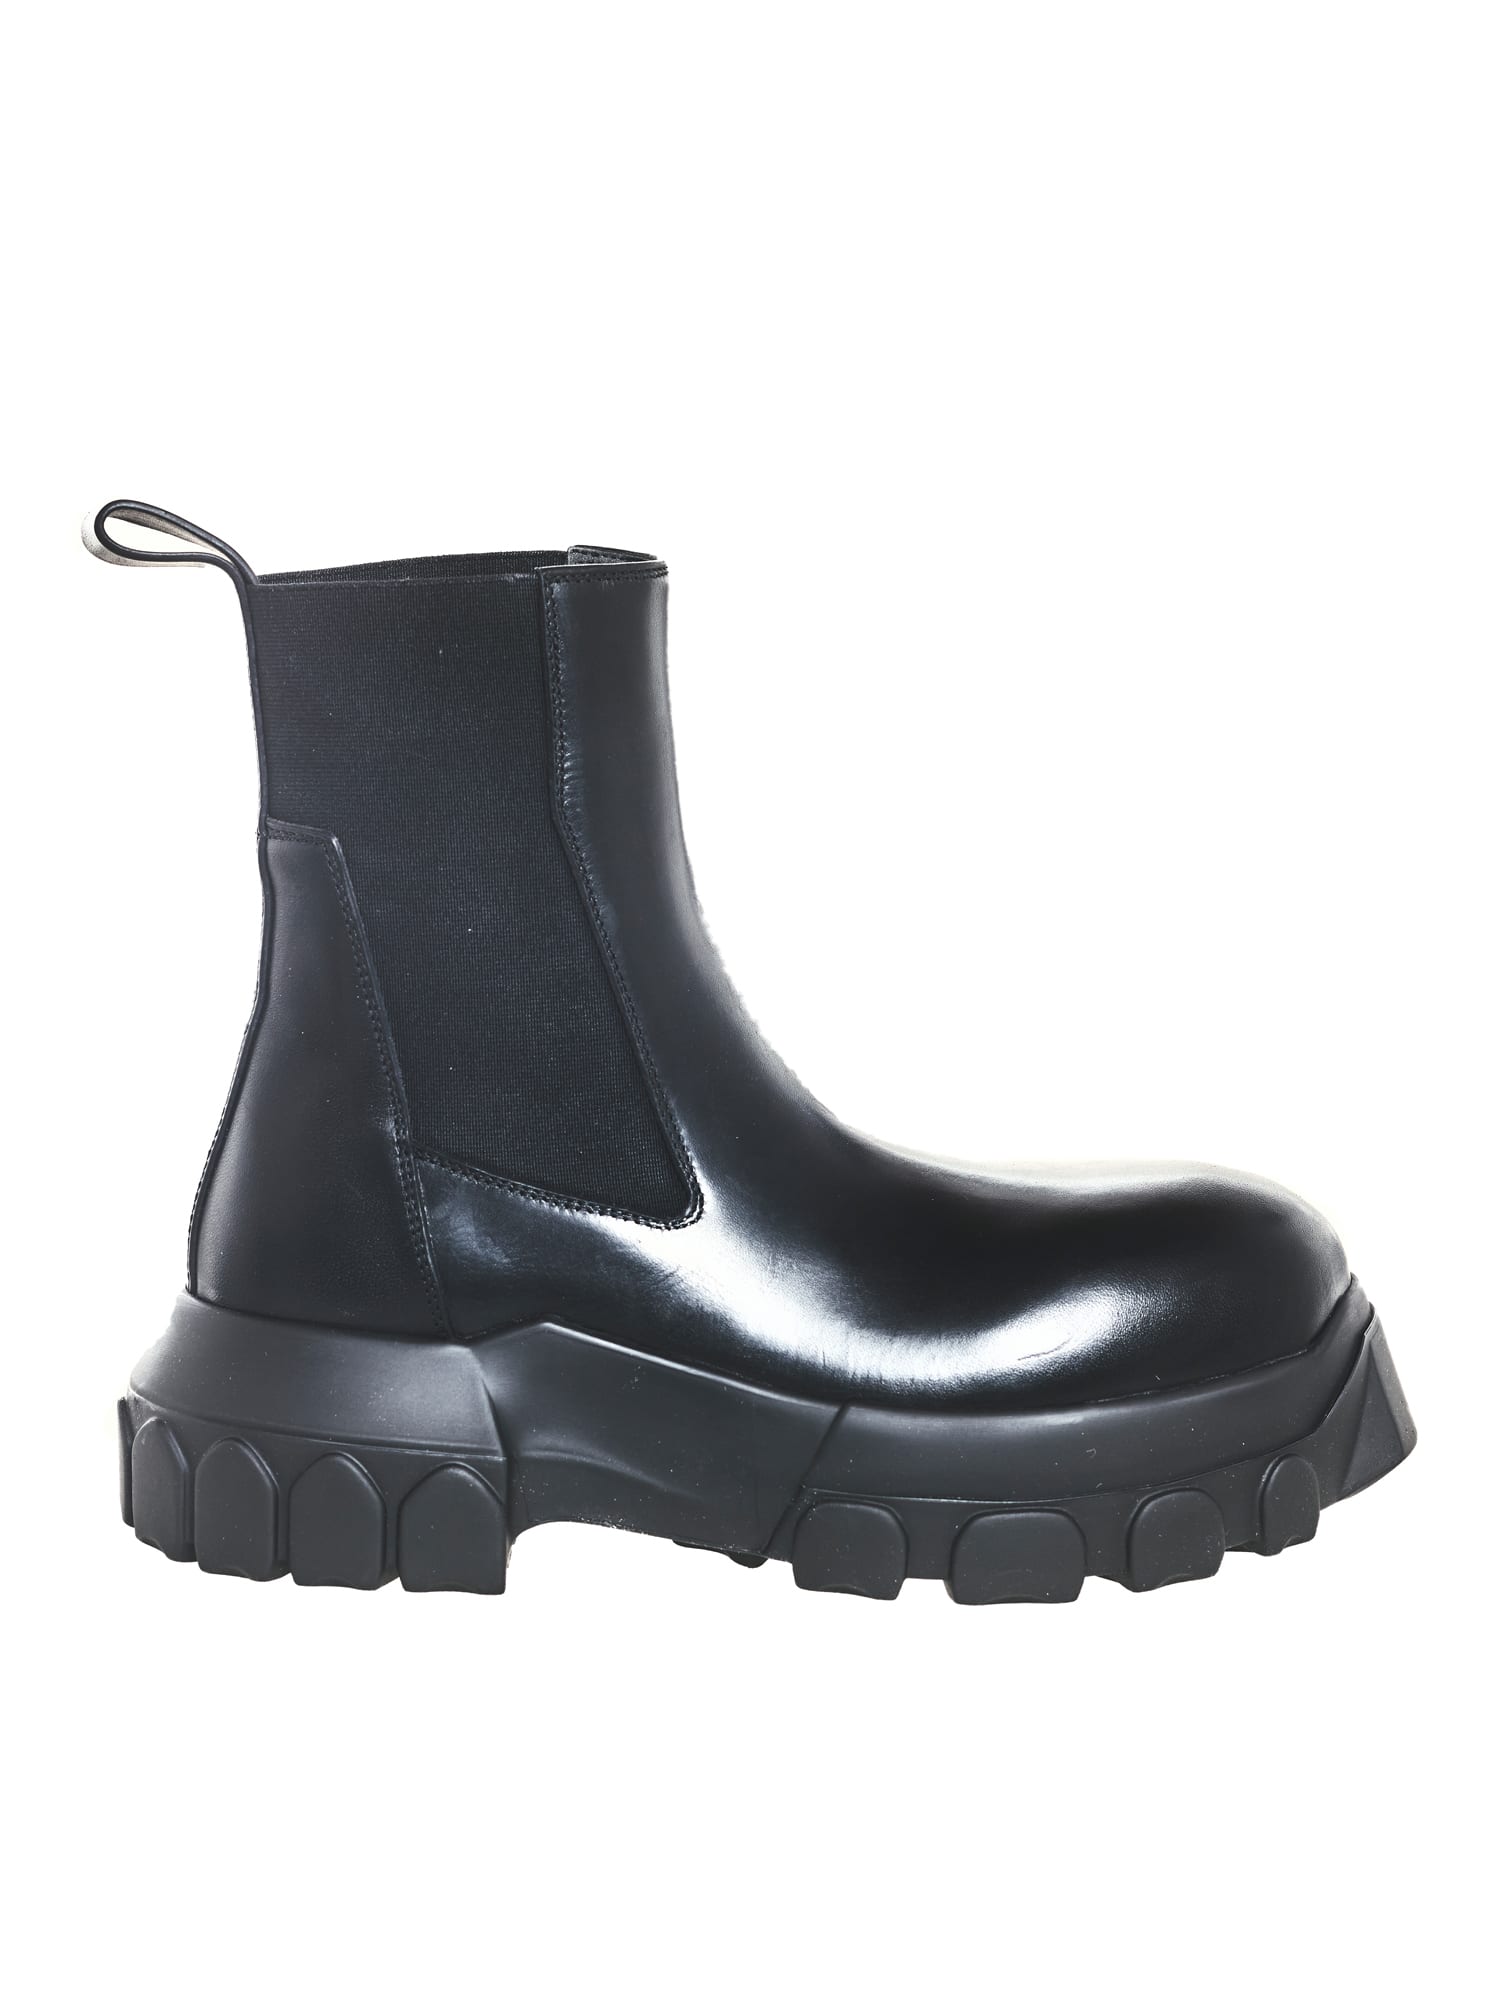 Rick Owens Leather Boots - Beatle Bozo Tractor